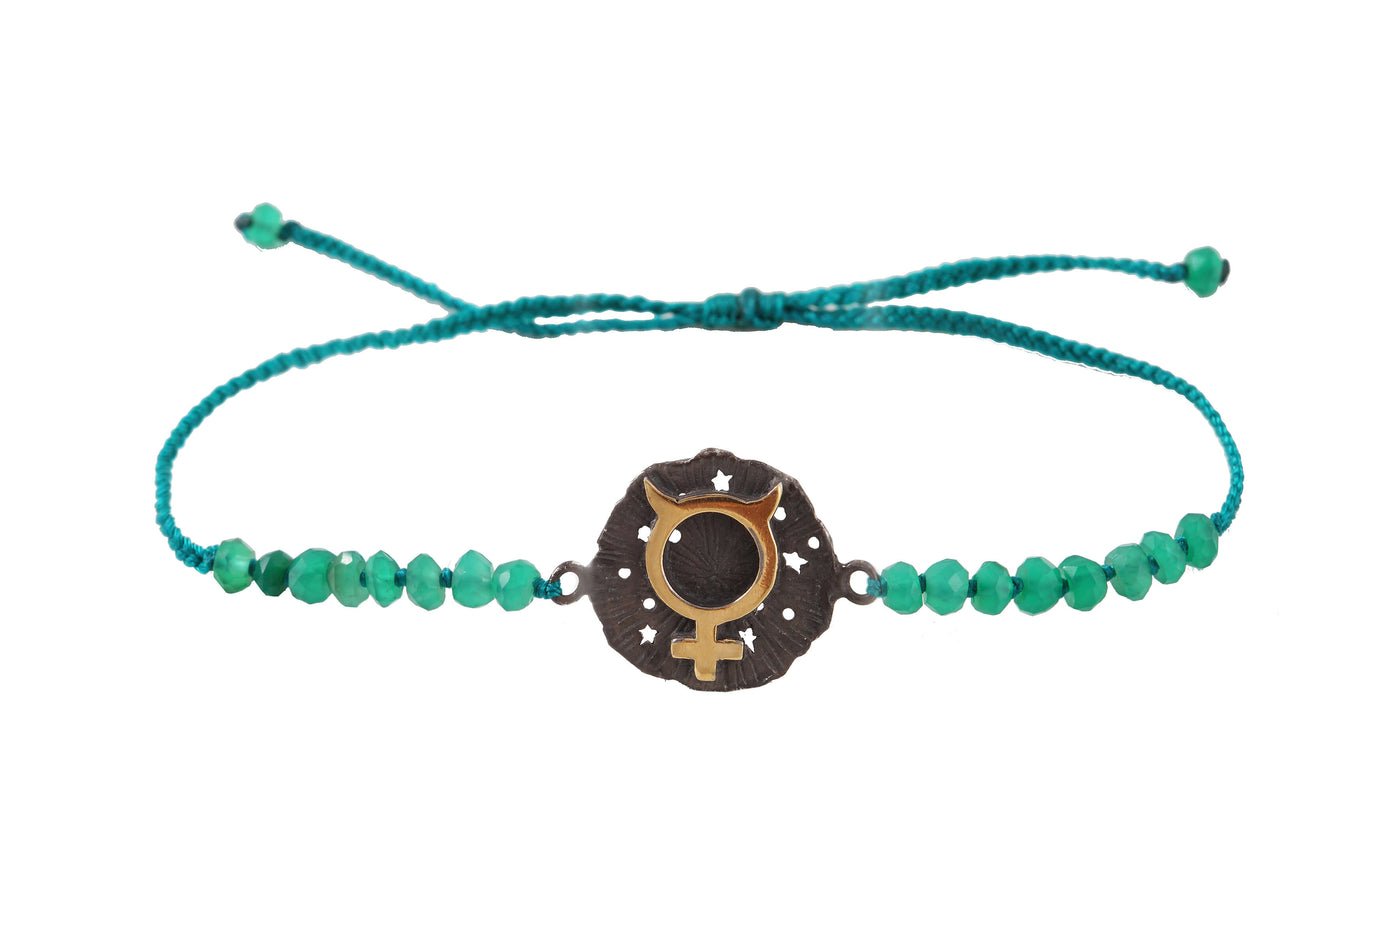 Mercury Medallion Amulet bracelet with beads. Gold plated and oxide